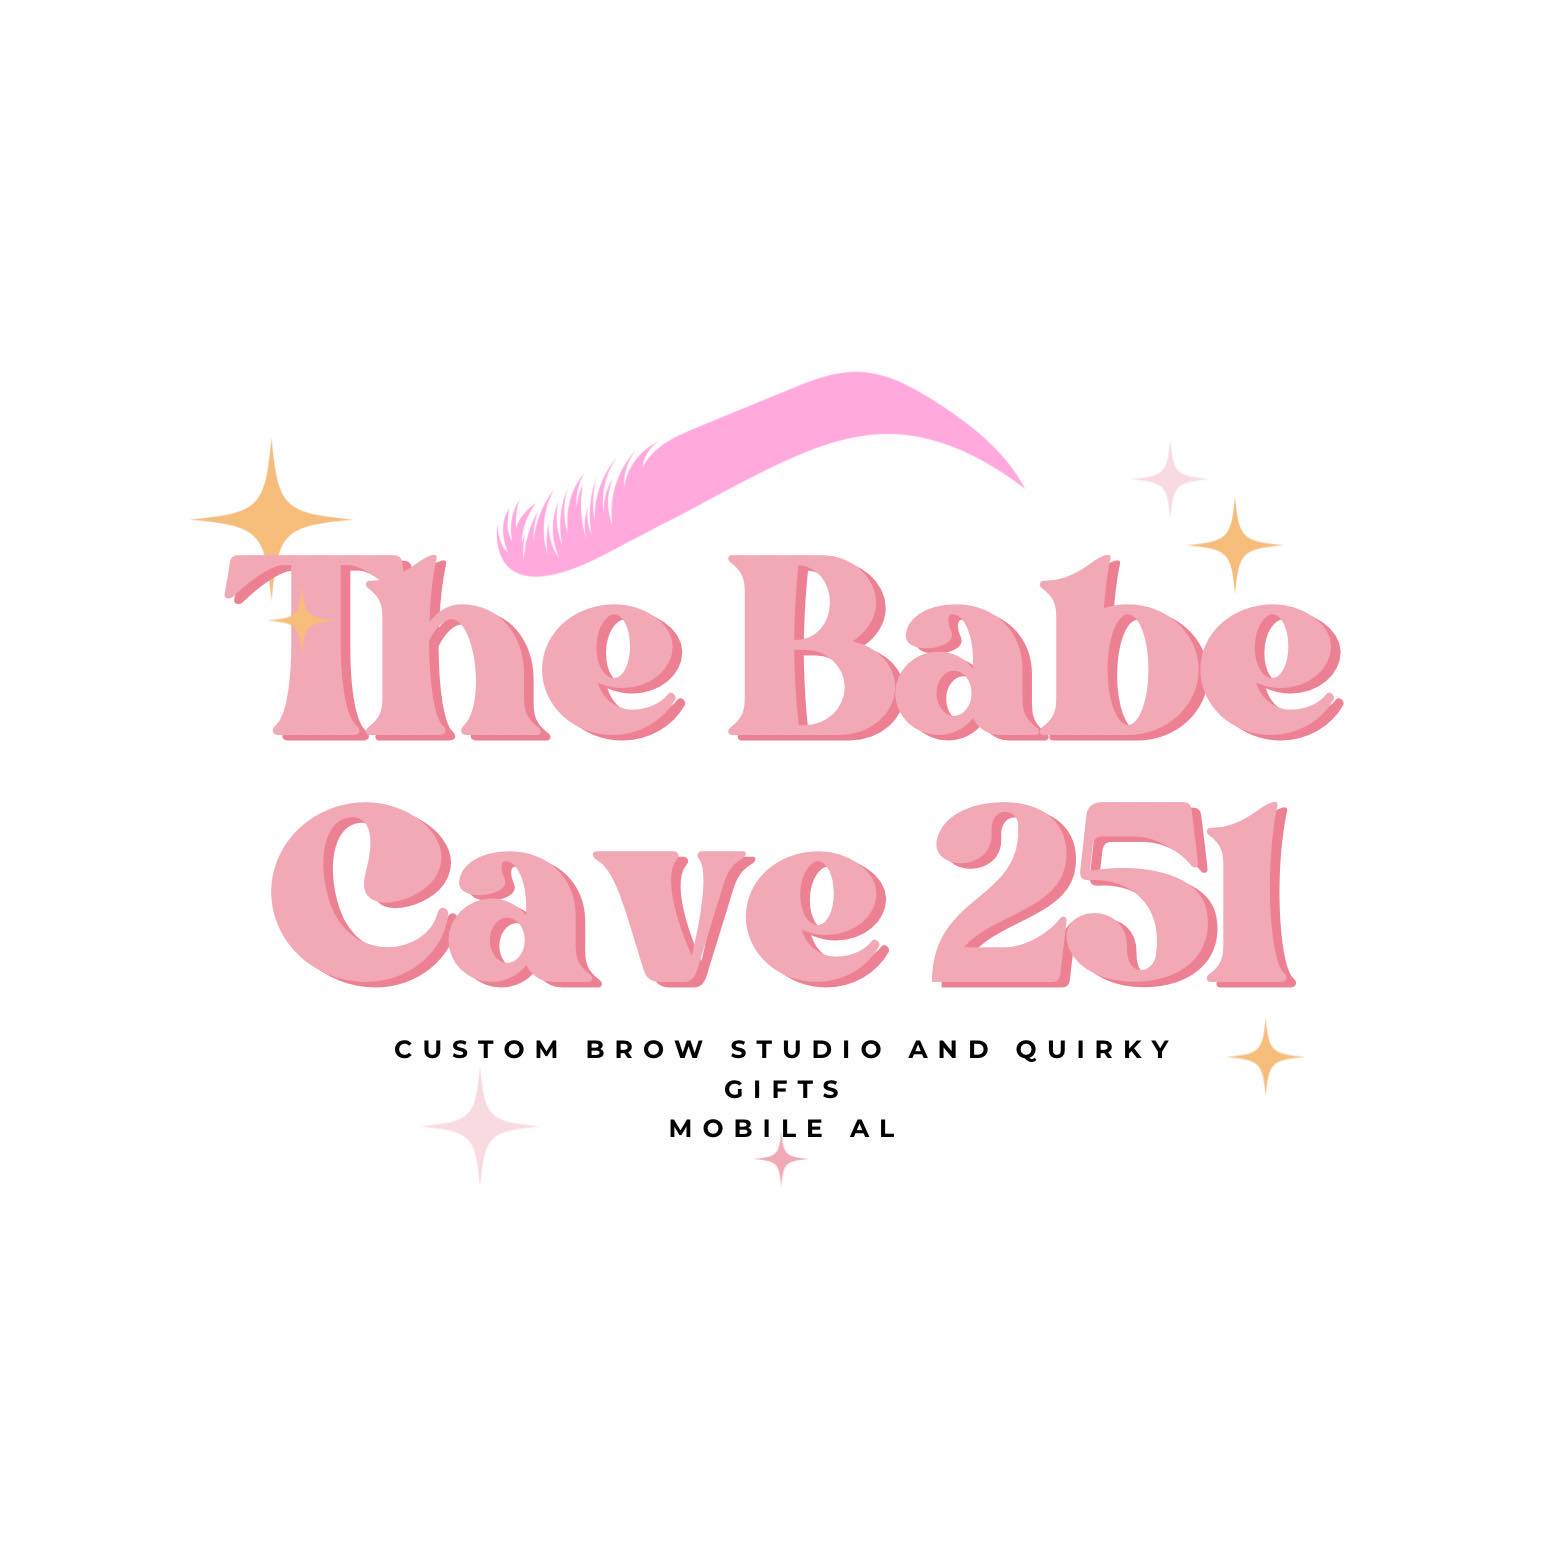 Babe Cave 251